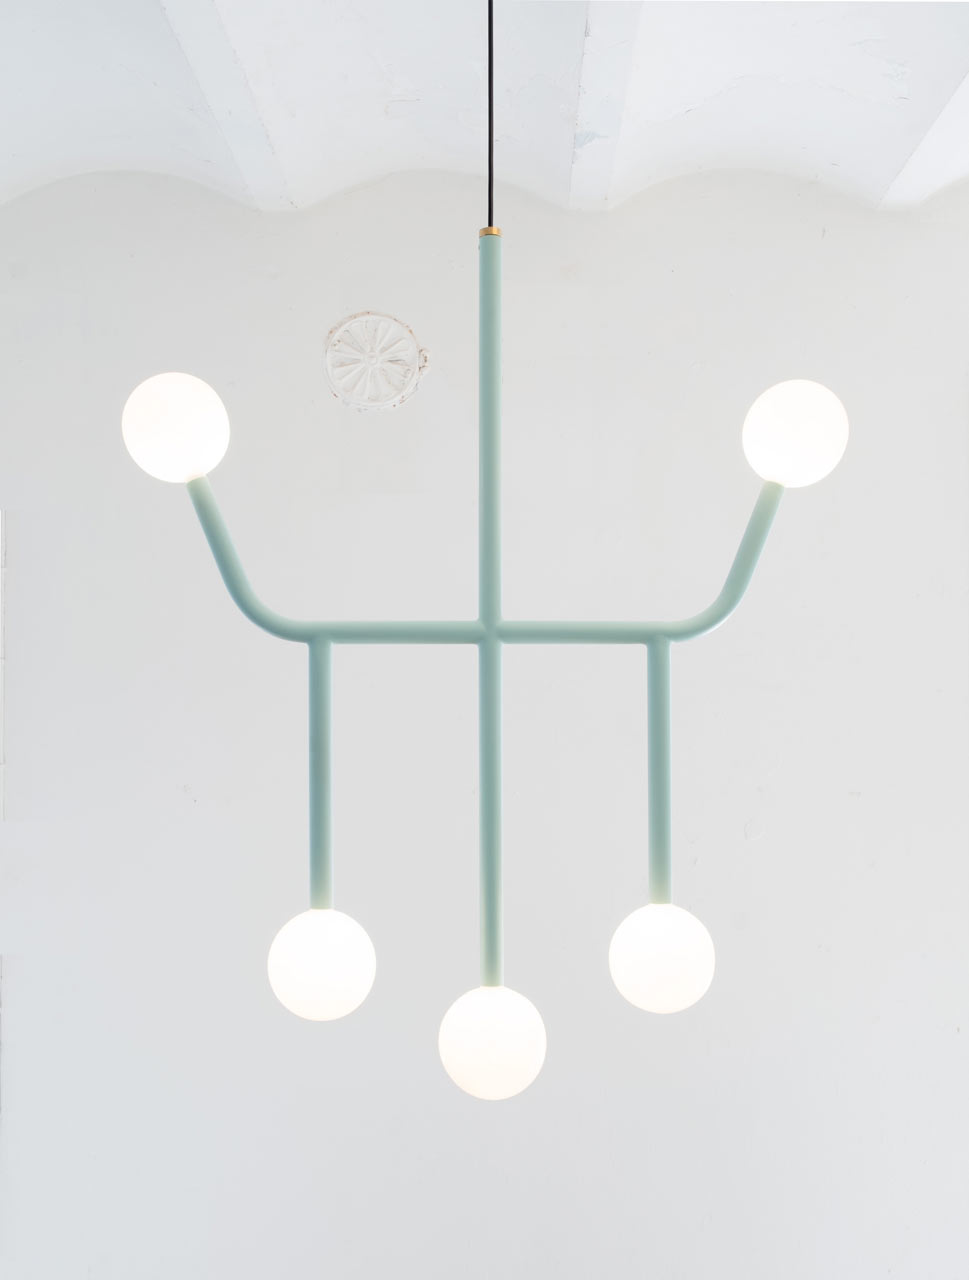 A Circuit Board-Inspired Chandelier